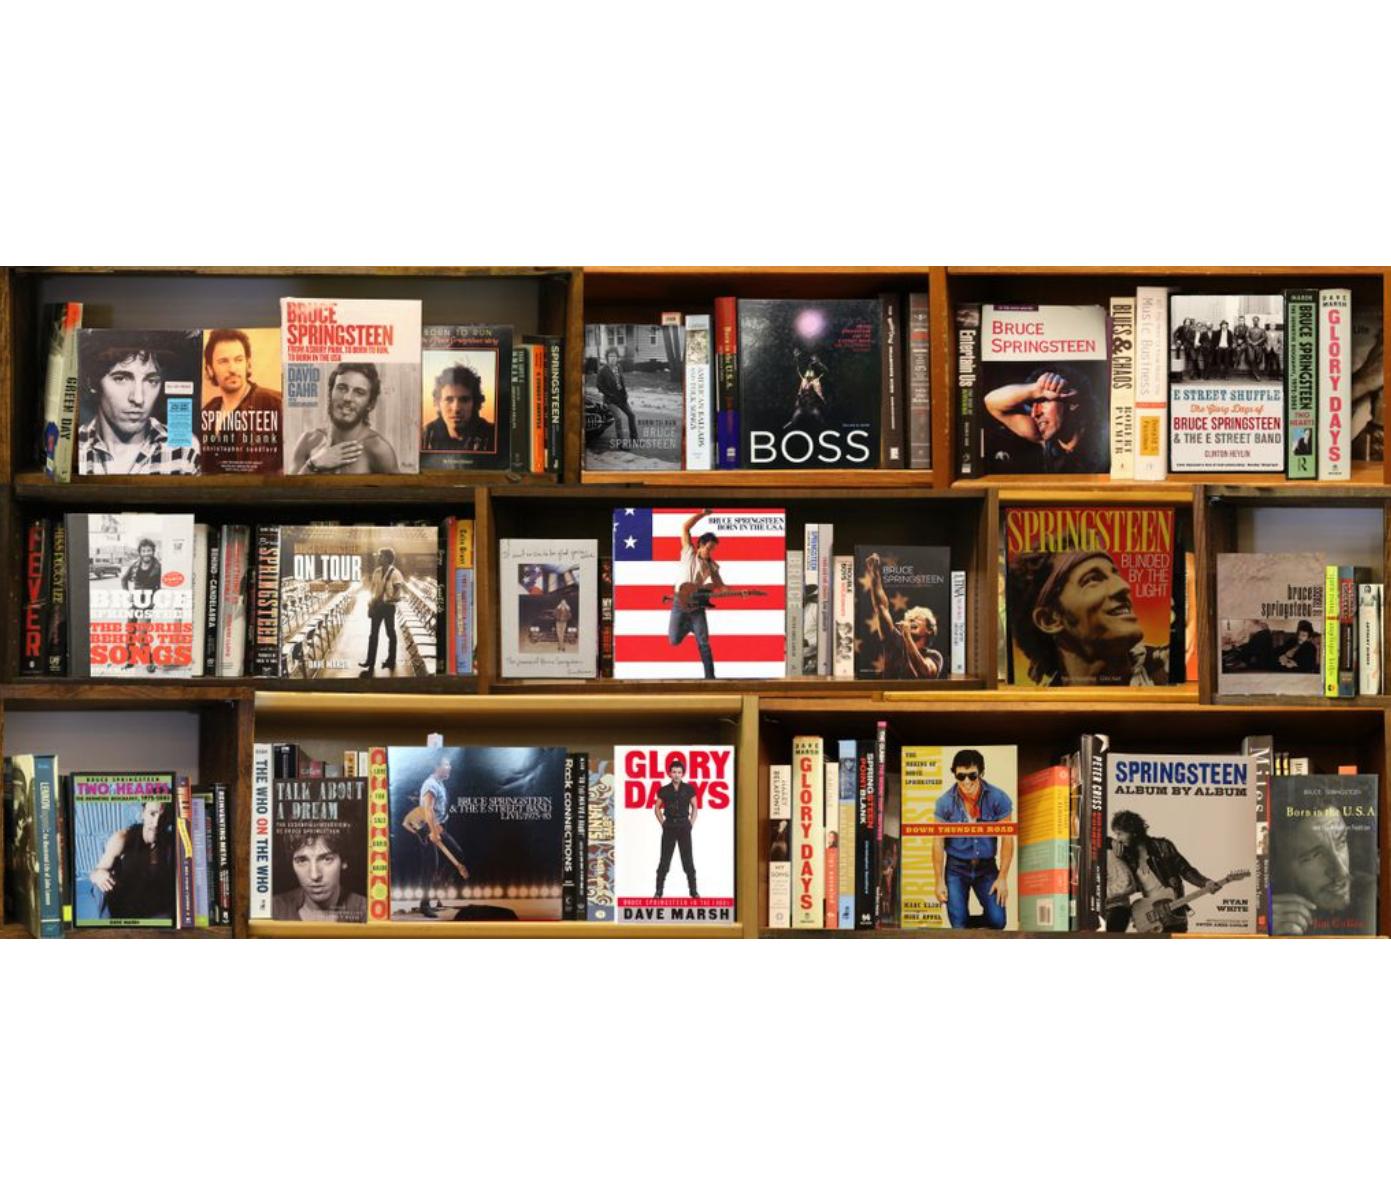 Boss (Bruce Springsteen) 3/5 BookScape by Max Steven Grossman 

Individually photographed books and bookshelves. Featuring Bruce Springsteen books and albums. 

In his photographic series of "Bookscapes" the assembled libraries only exist in his